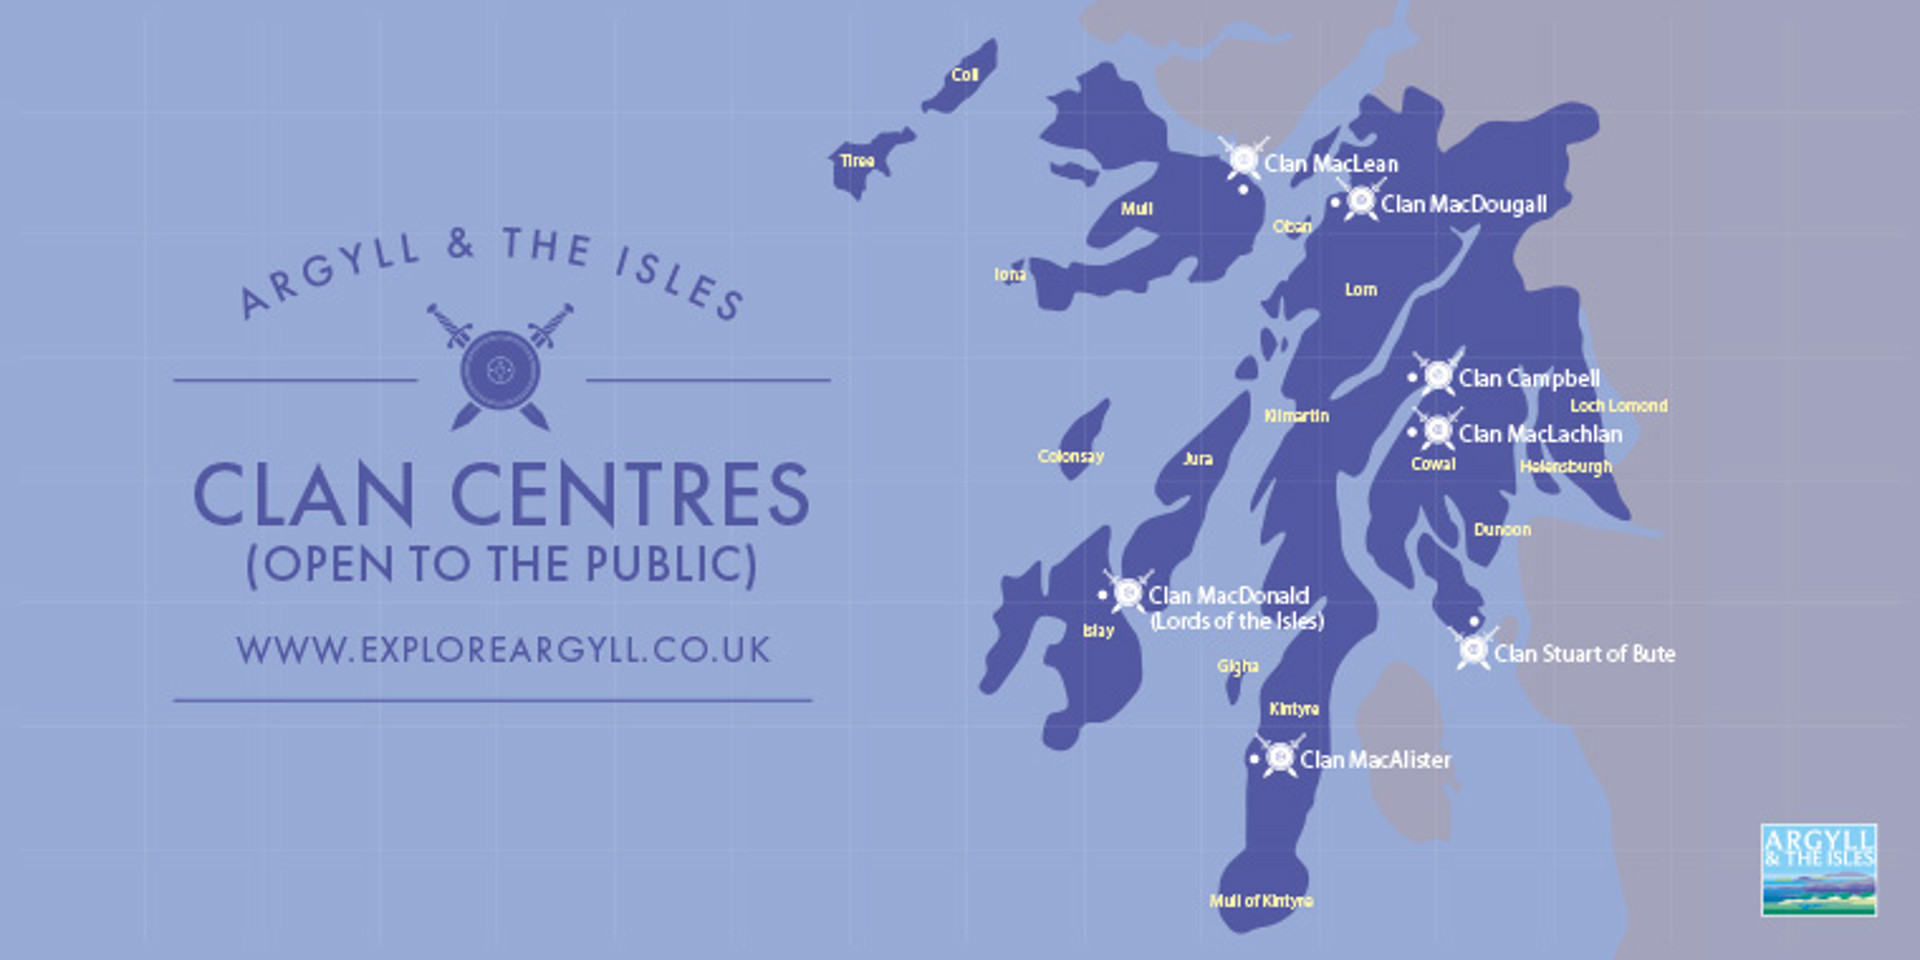 Background image - Argyll Clan Centres Map